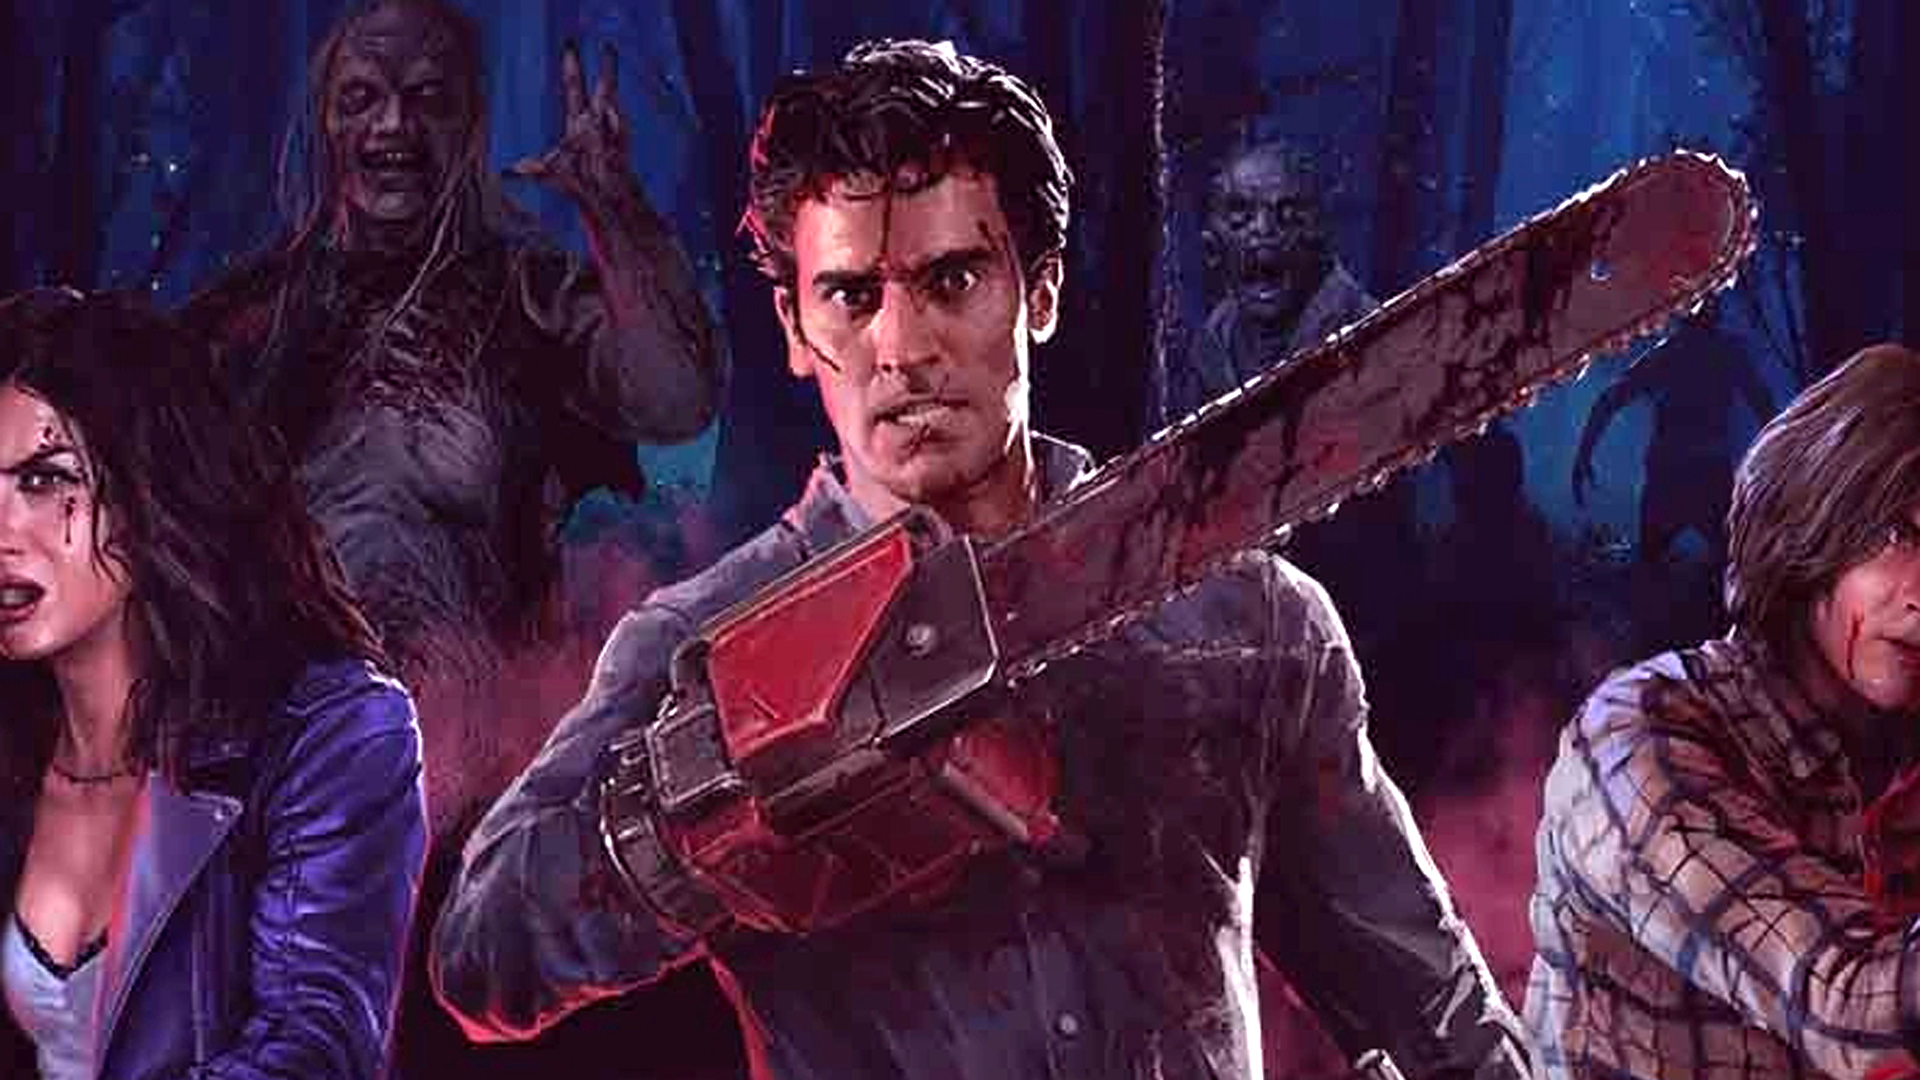 The Evil Dead game's missing the movie's 40th anniversary to add single- player